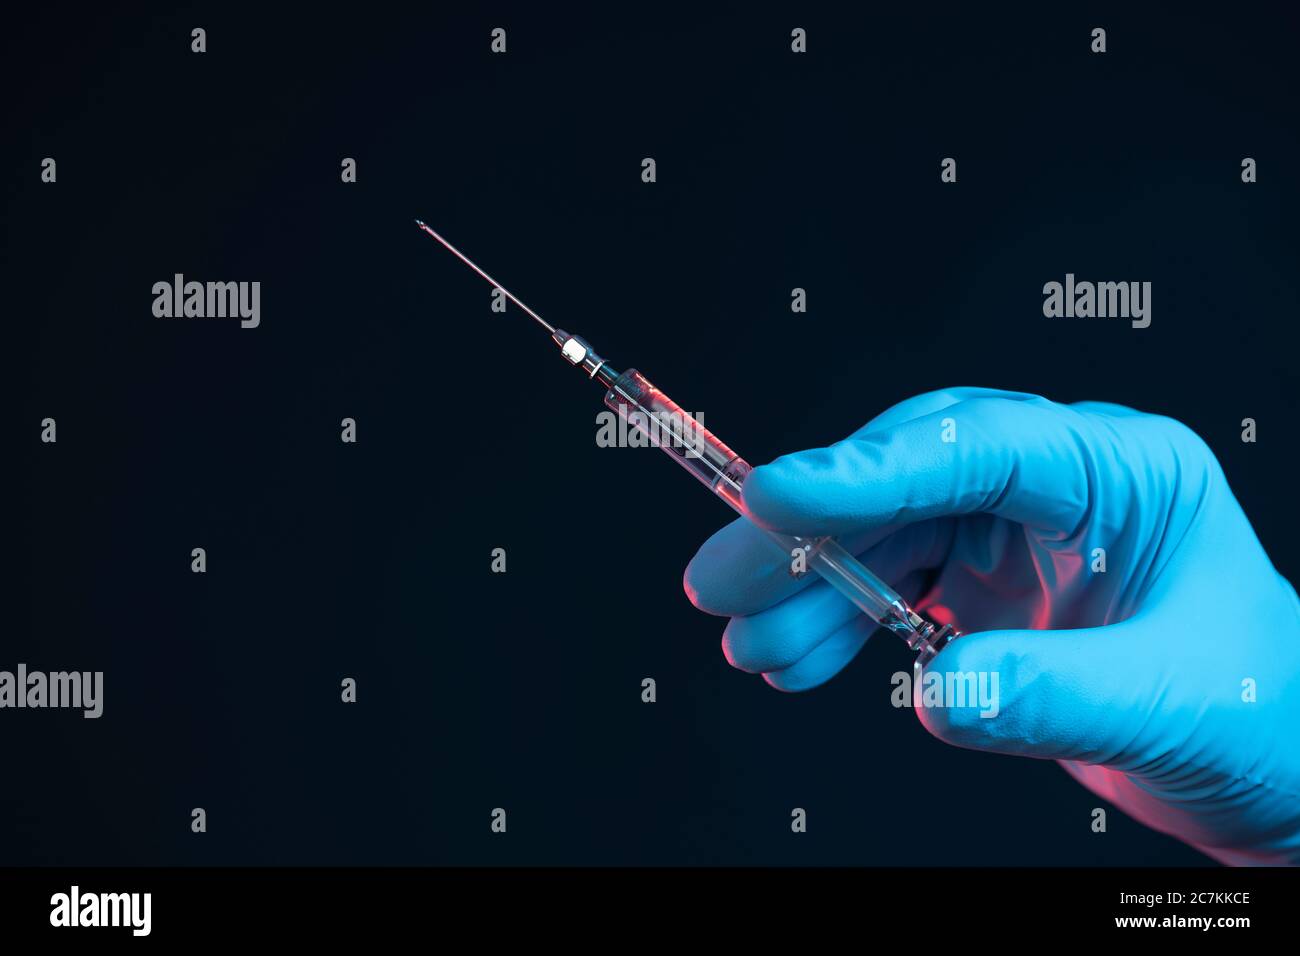 Symbol, corona, science, research, vaccine, danger, right, syringe, cannula, hand, bottom right Stock Photo